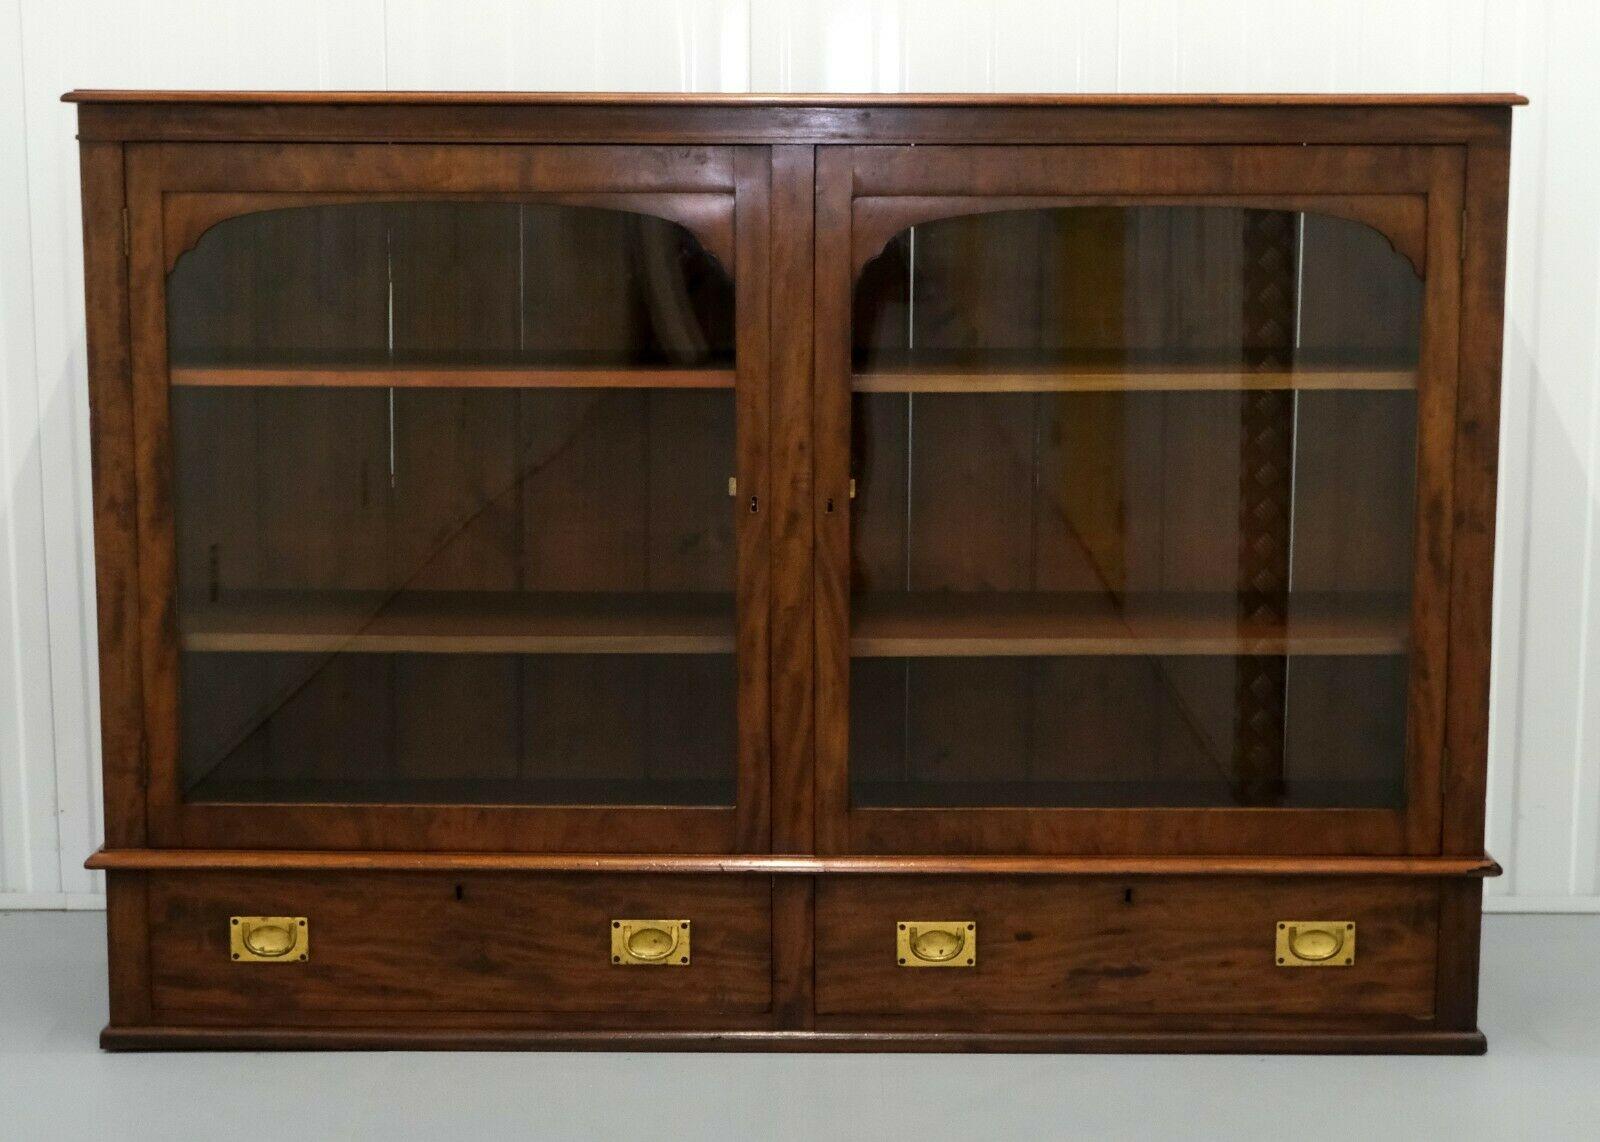 We are delighted to offer for sale this solid Victorian Mahogany bookcase with adjustable shelves and campaign drawers.

This elegant yet practical bookcase shows a nice, warm colour of brown from any angle you look at it. It is well presented